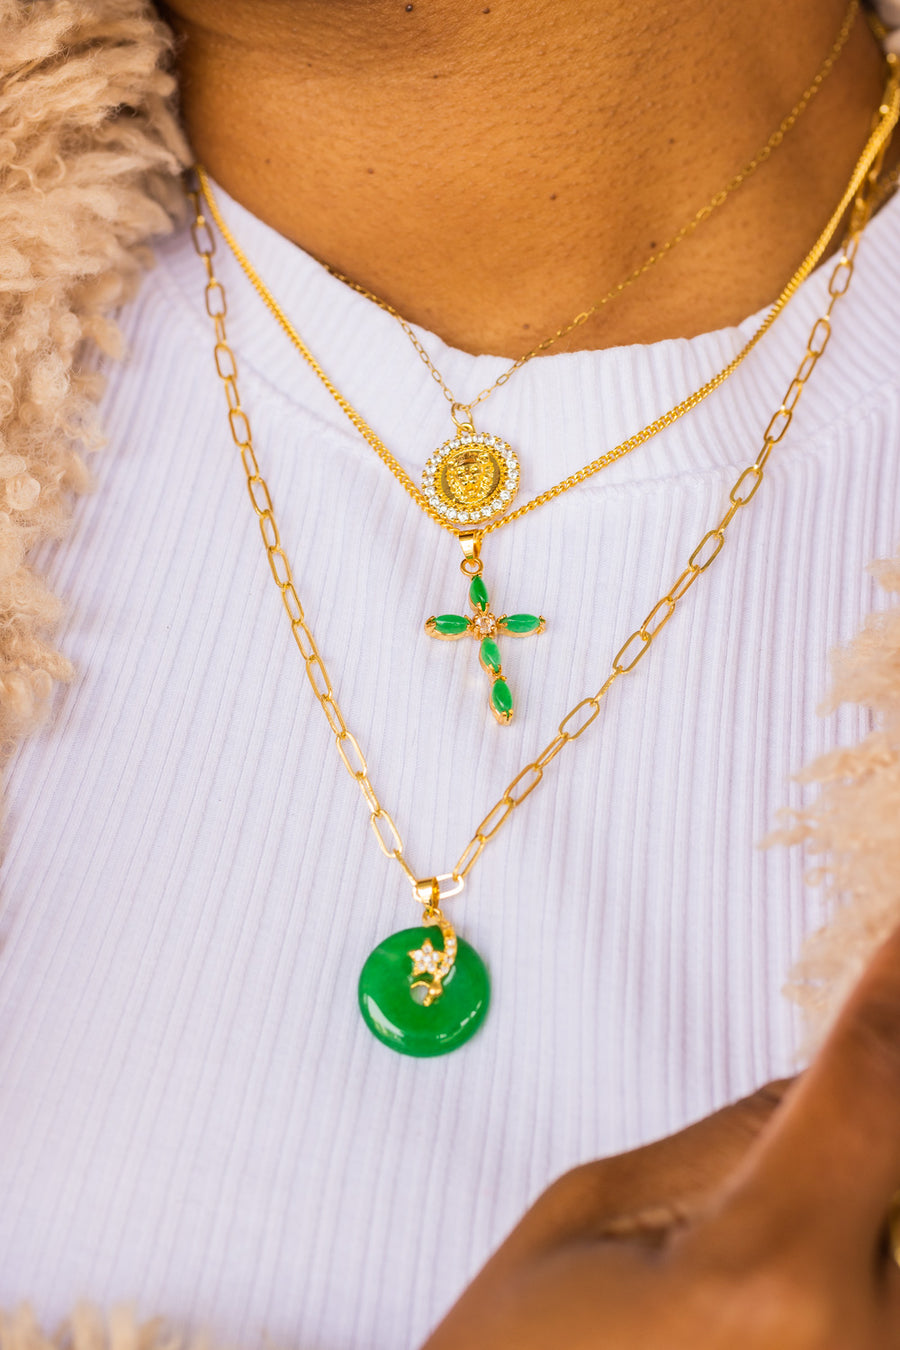 The Titania Jade Necklace Collection